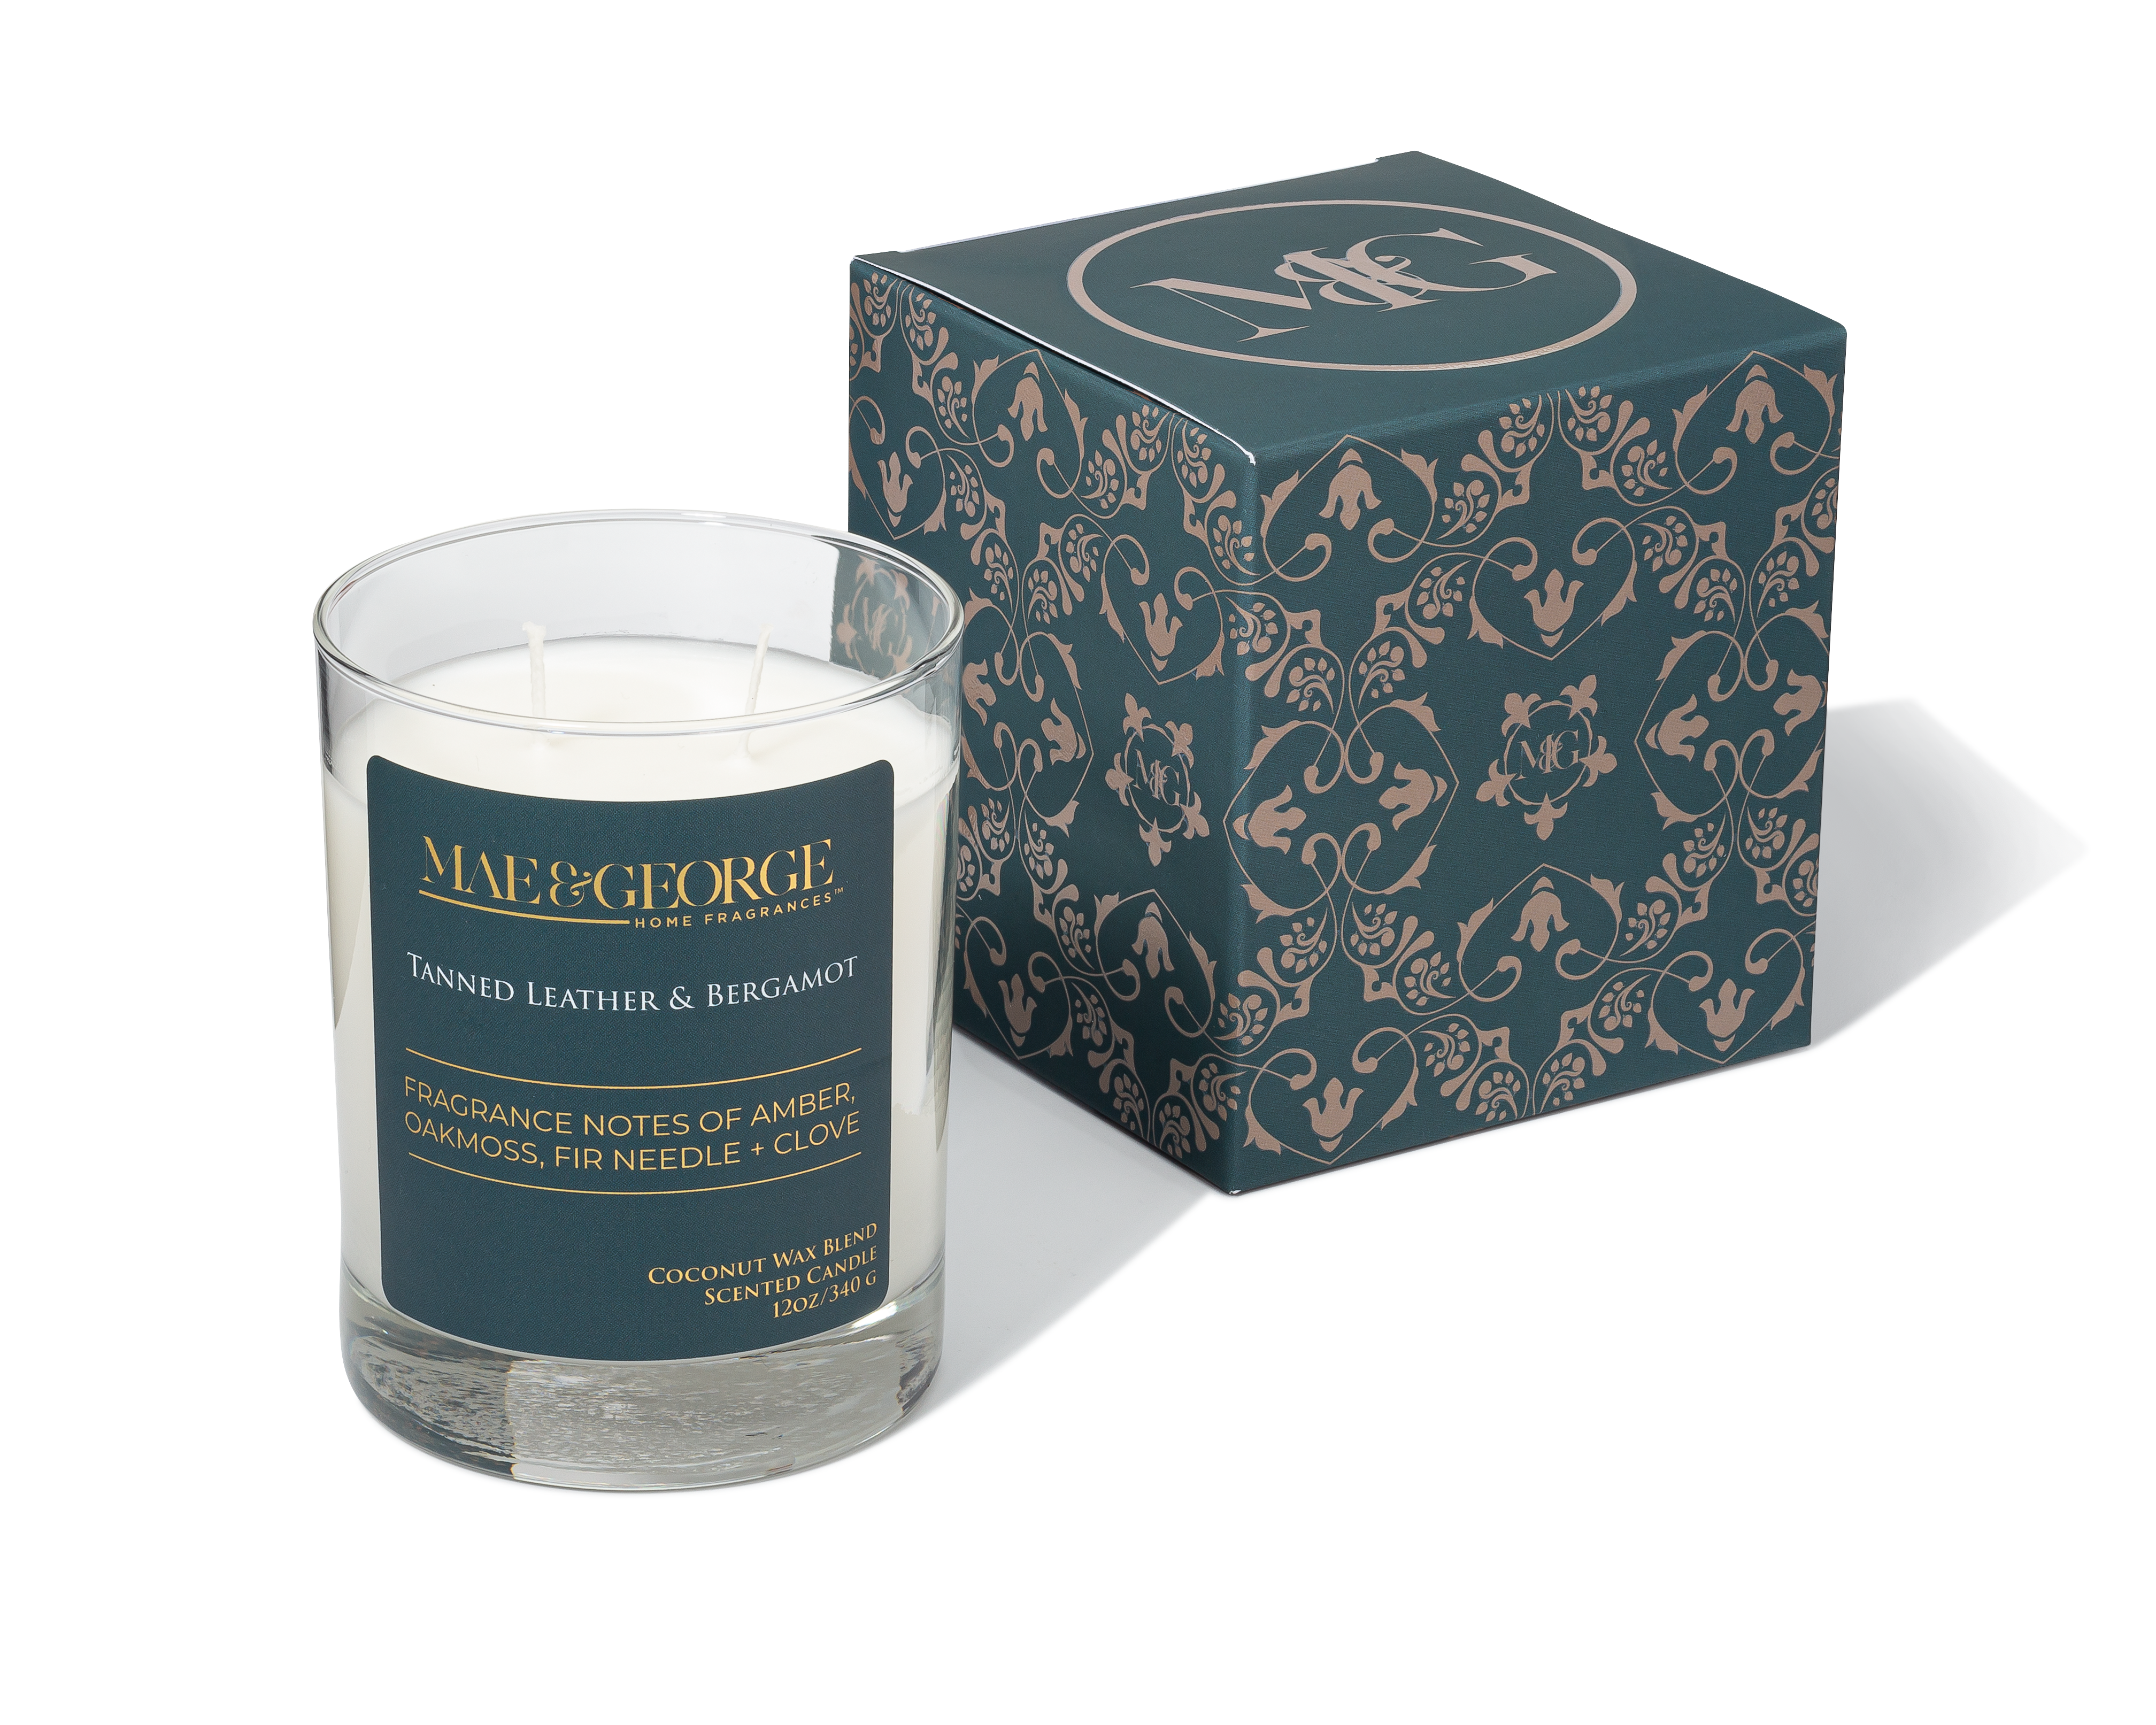 Tanned Leather & Bergamot Candle